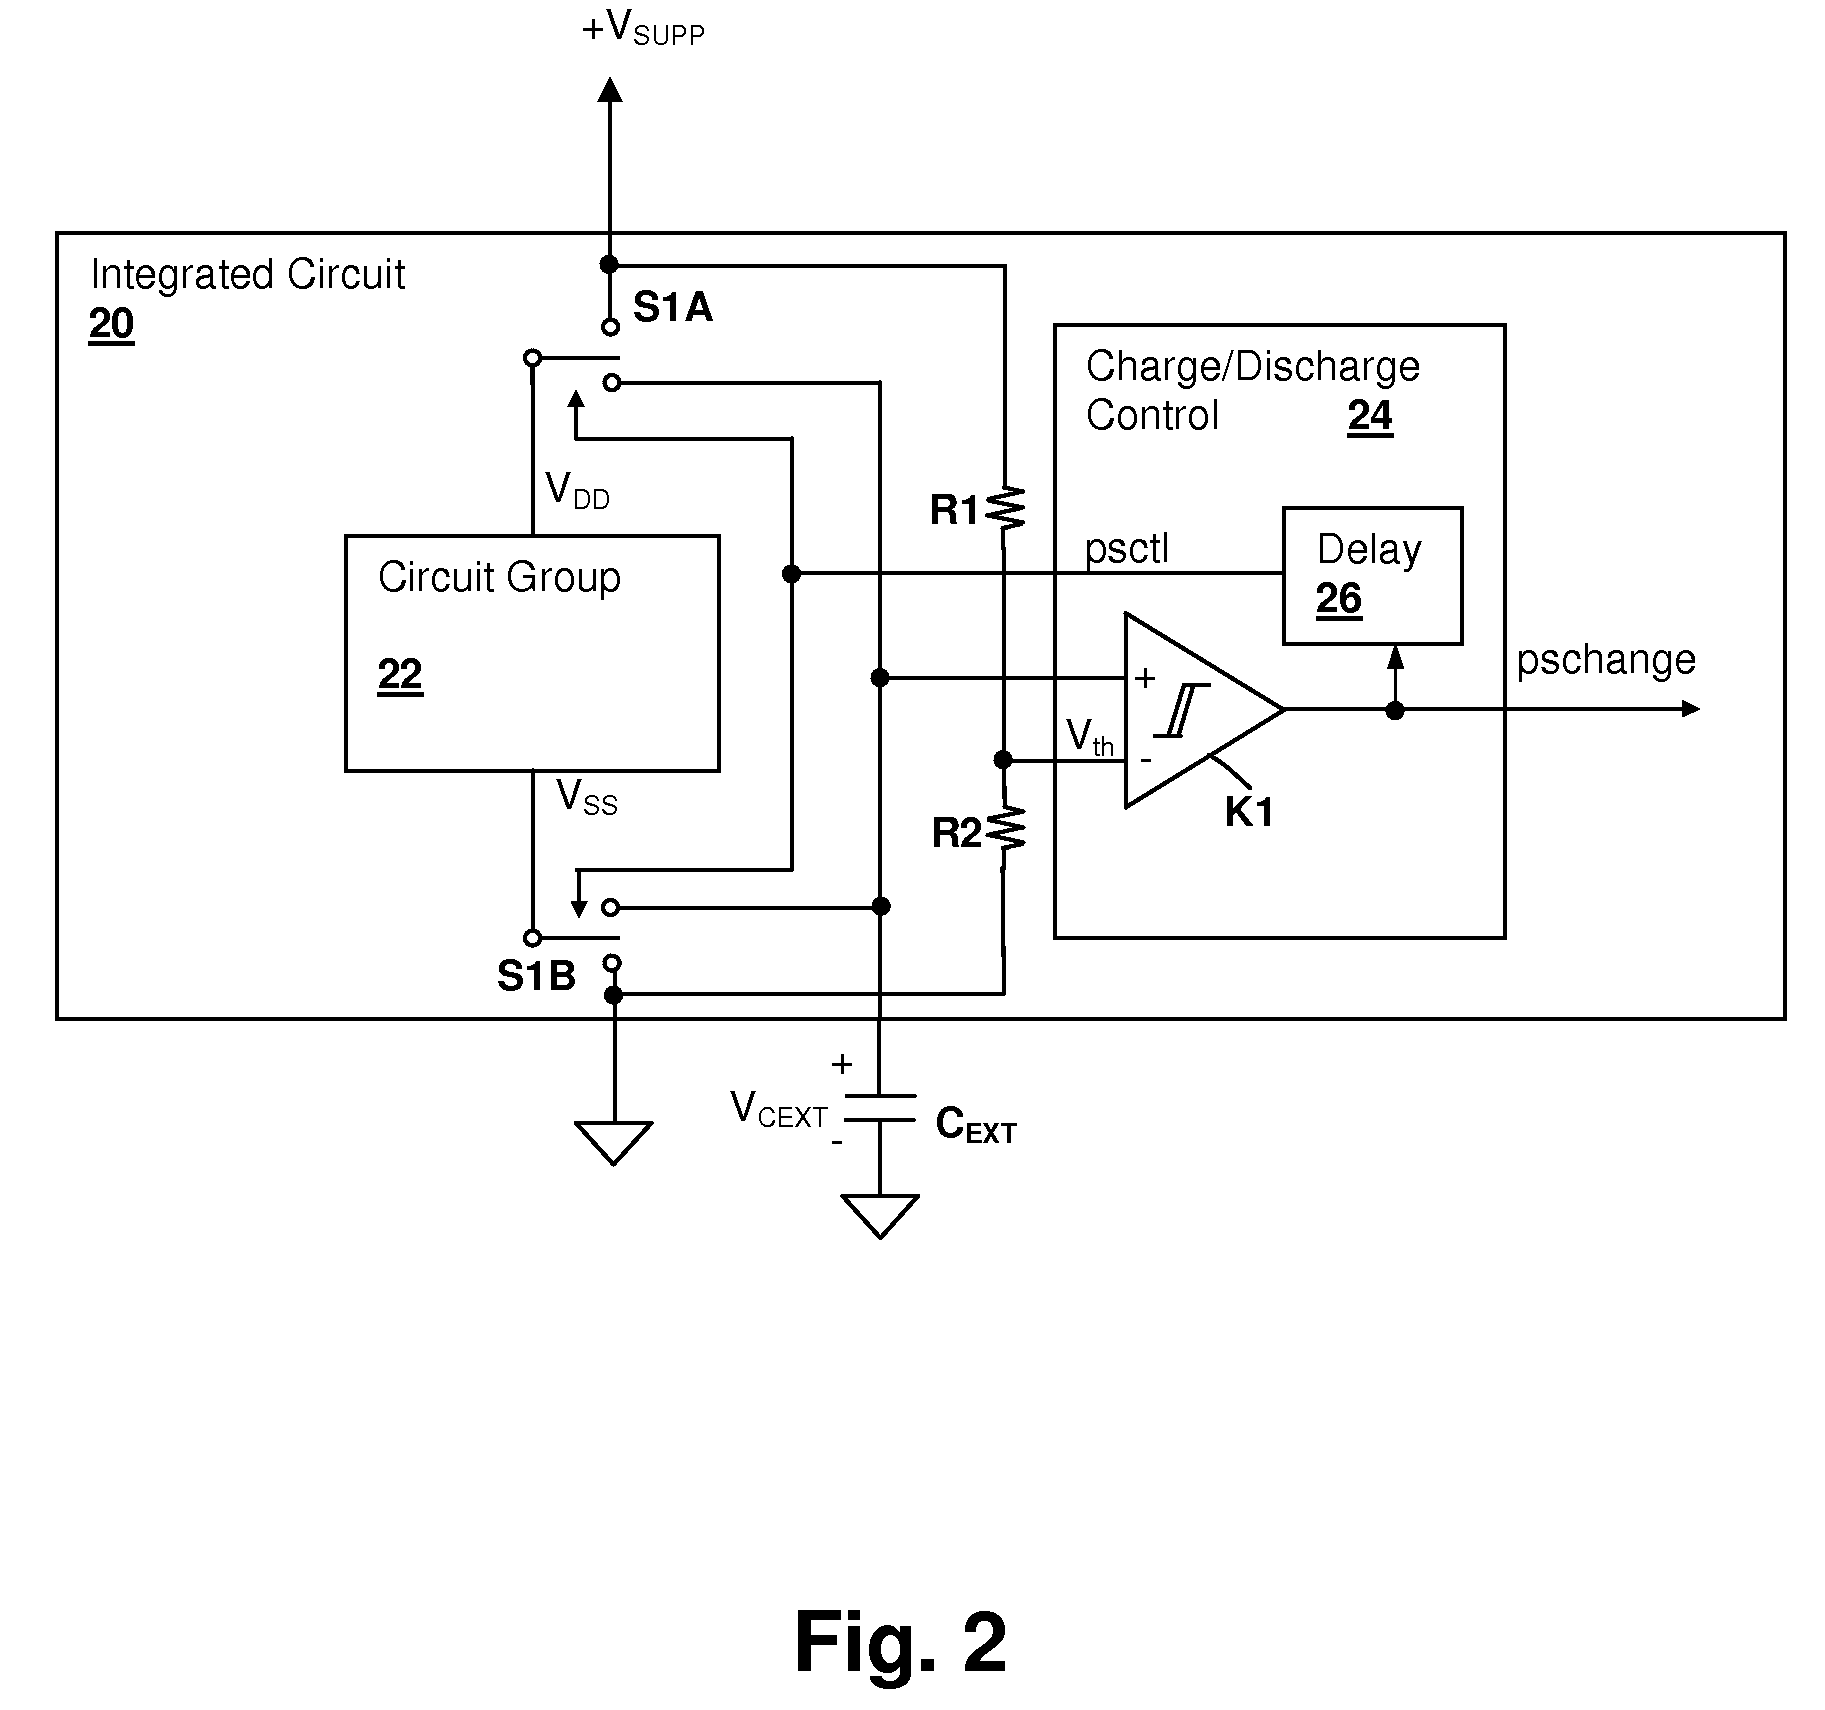 Powering a circuit by alternating power supply connections in series and parallel with a storage capacitor